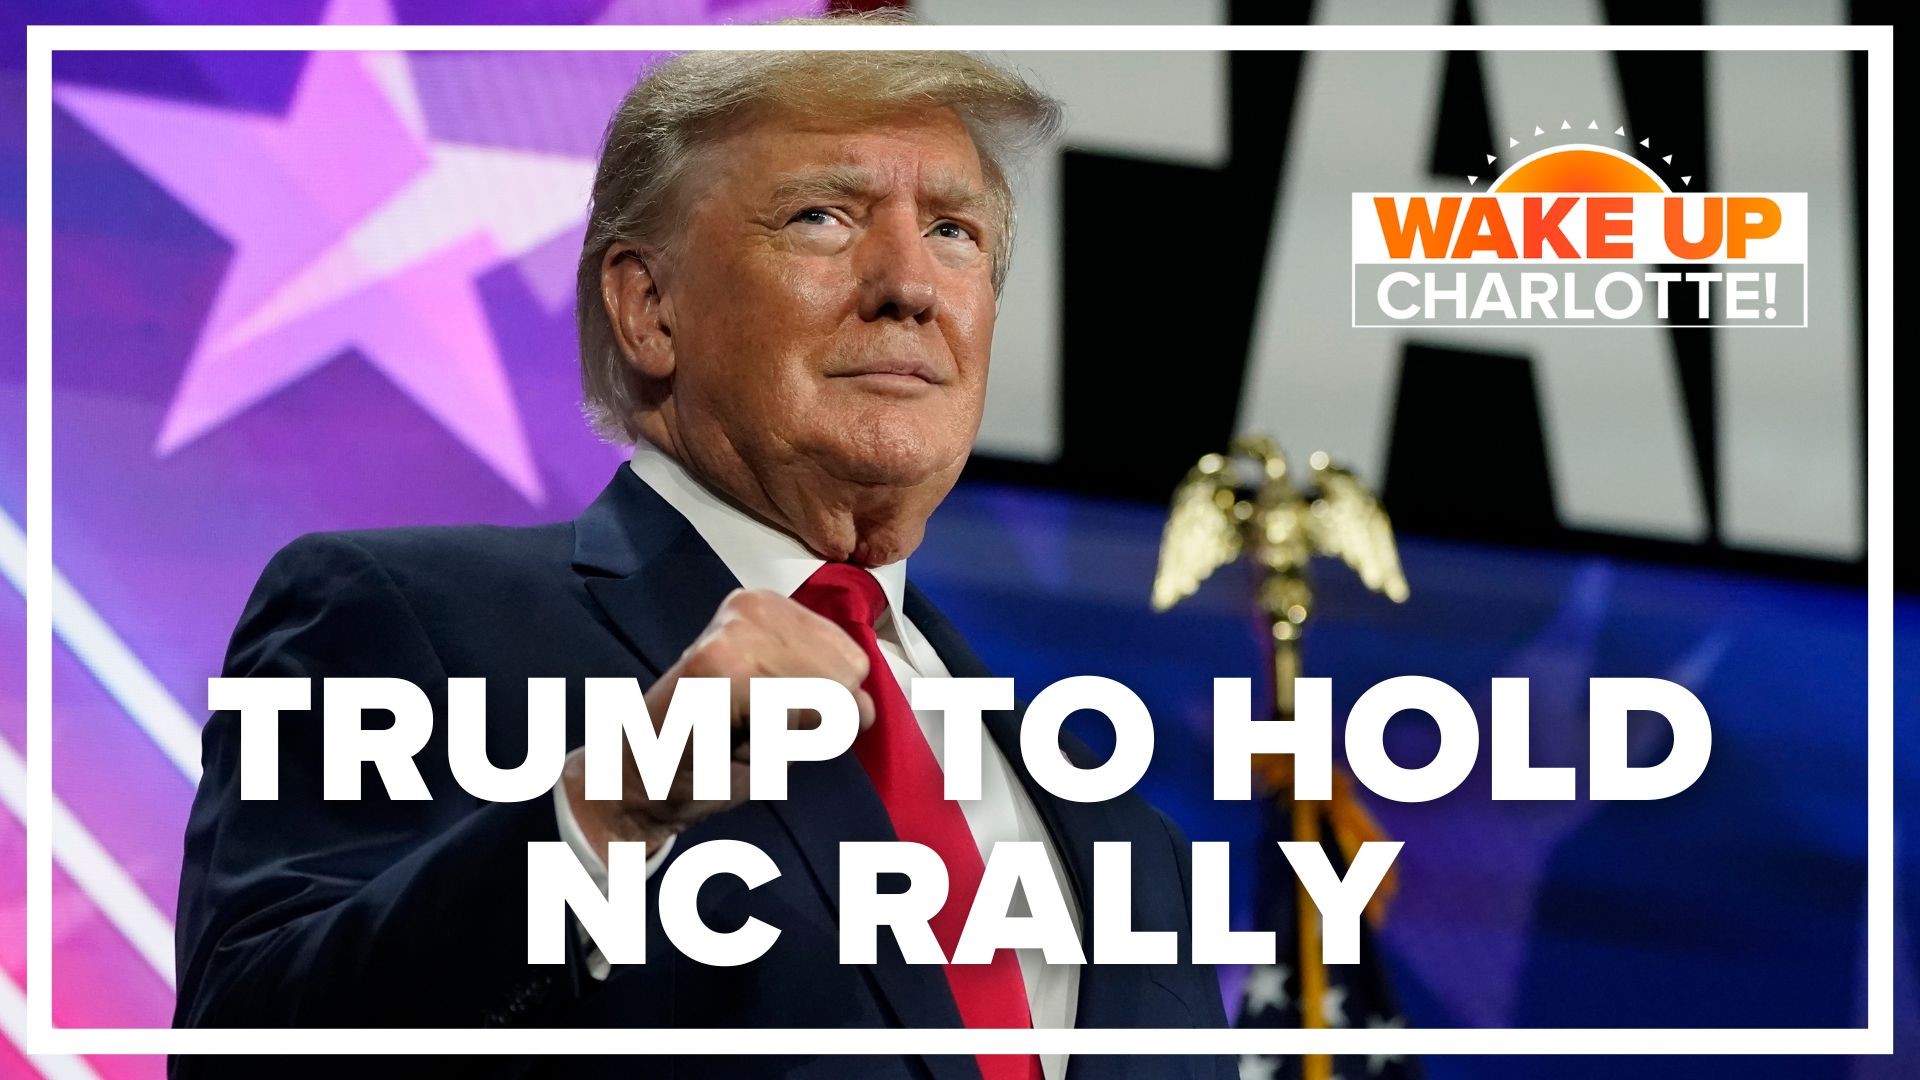 Former President Donald Trump will be in North Carolina later this month to rally supporters of Rep. Ted Budd ahead of the 2022 midterm elections.